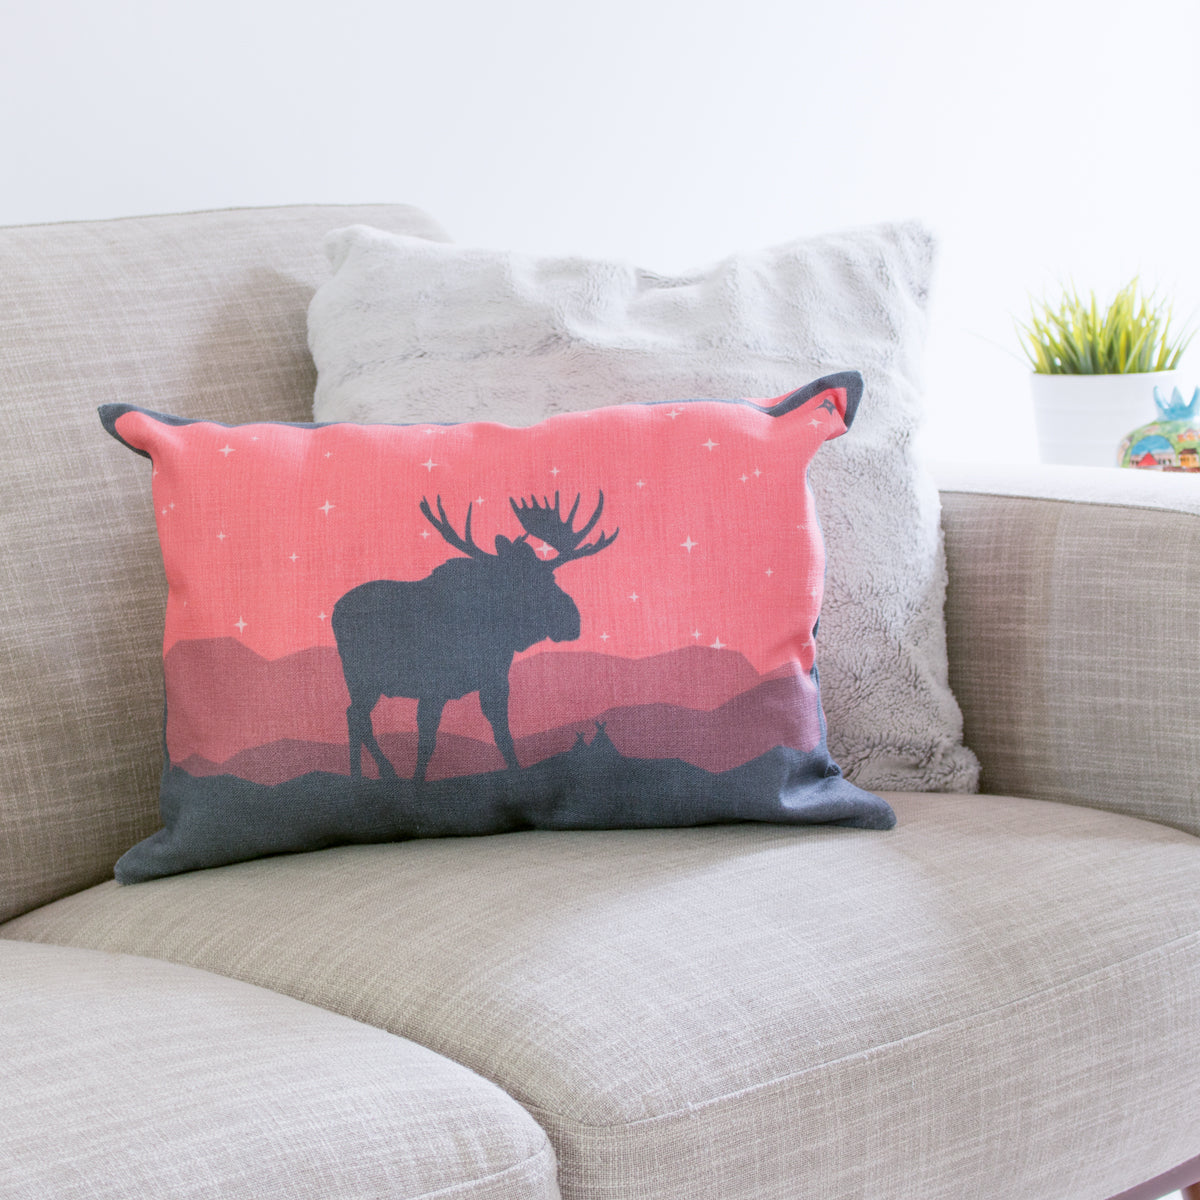 Moose Pillow Cover - George Brown College